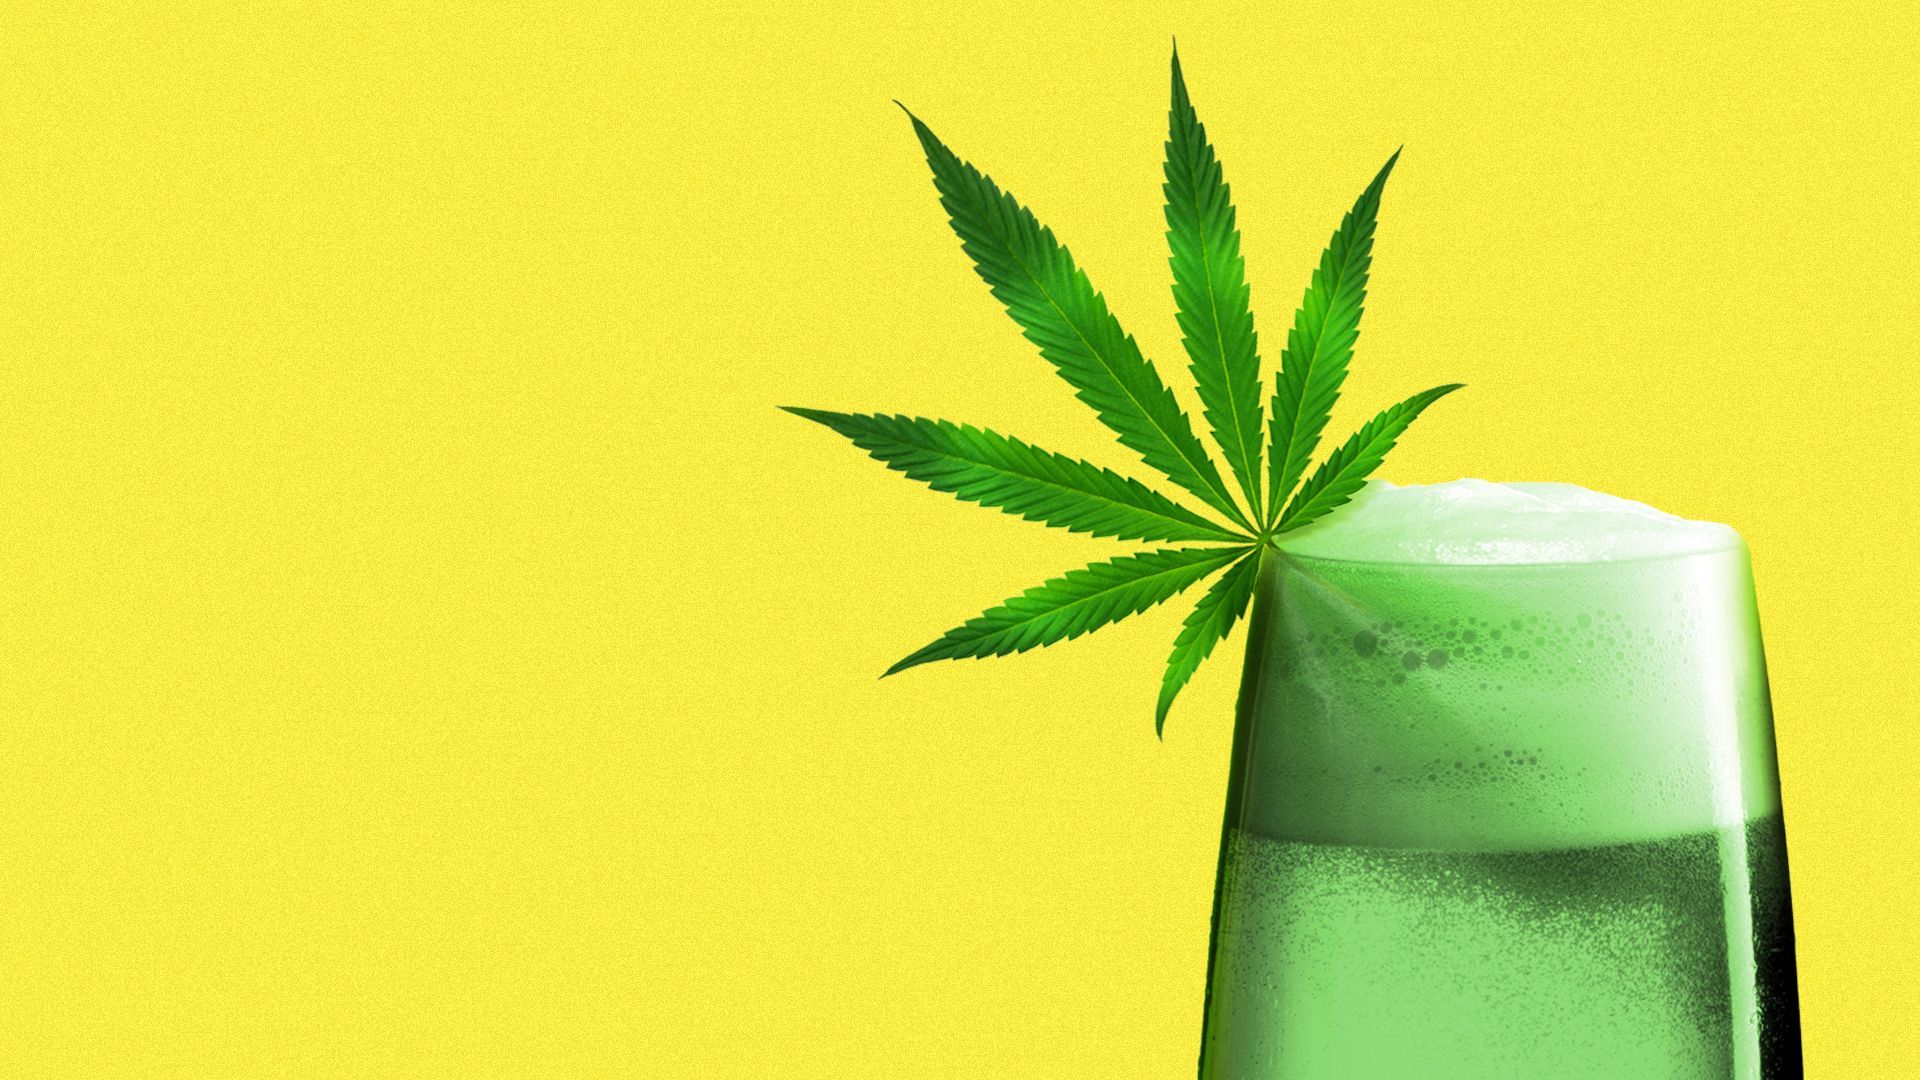 Illustration of a green drink in a glass with a marijuana leaf on the rim